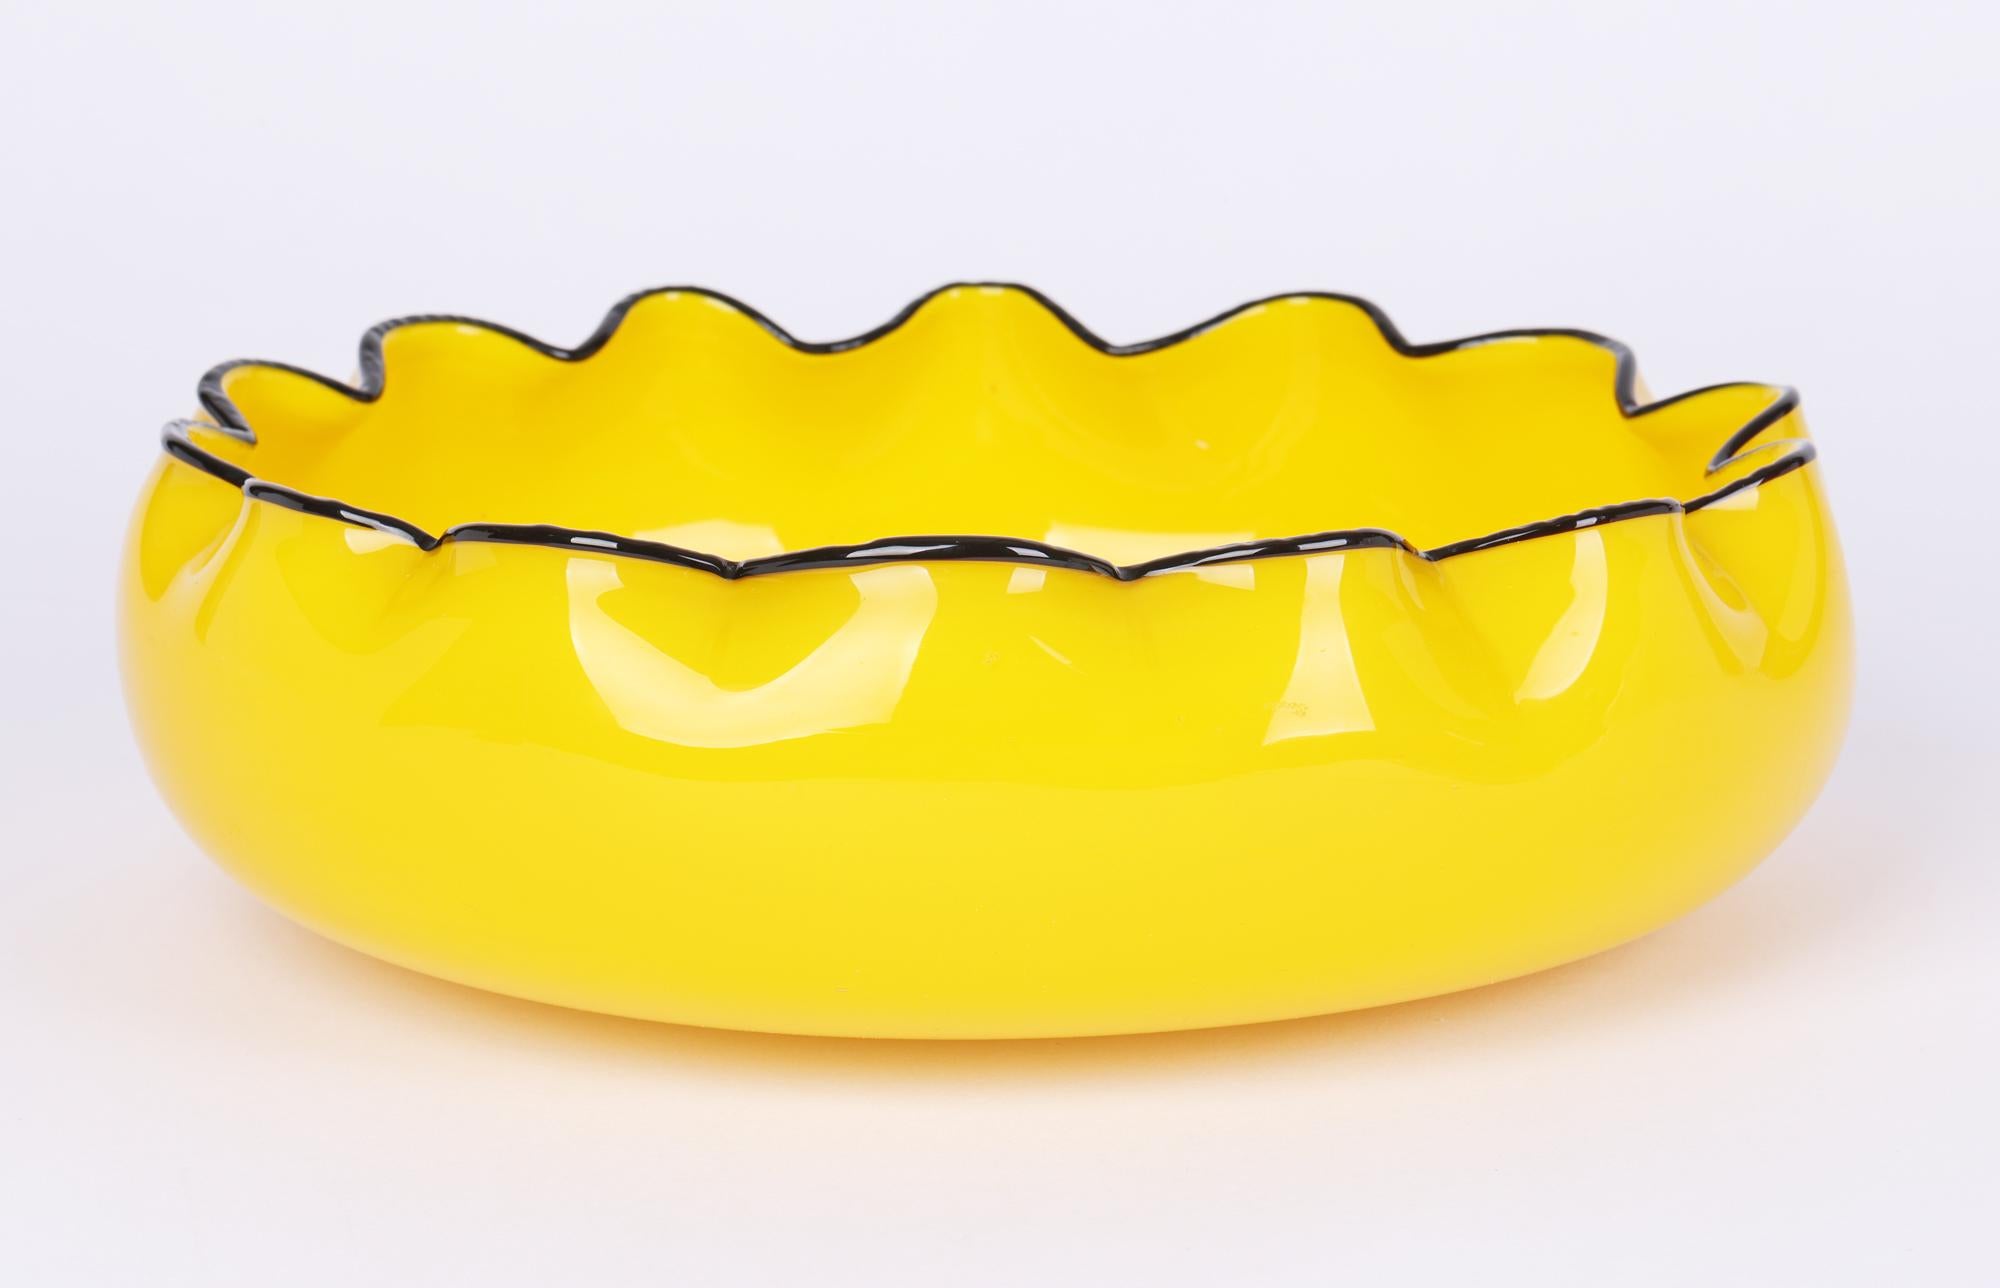 Hand-Crafted Loetz Piped Rim Yellow Tango Art Glass Bowl by Michael Powolny